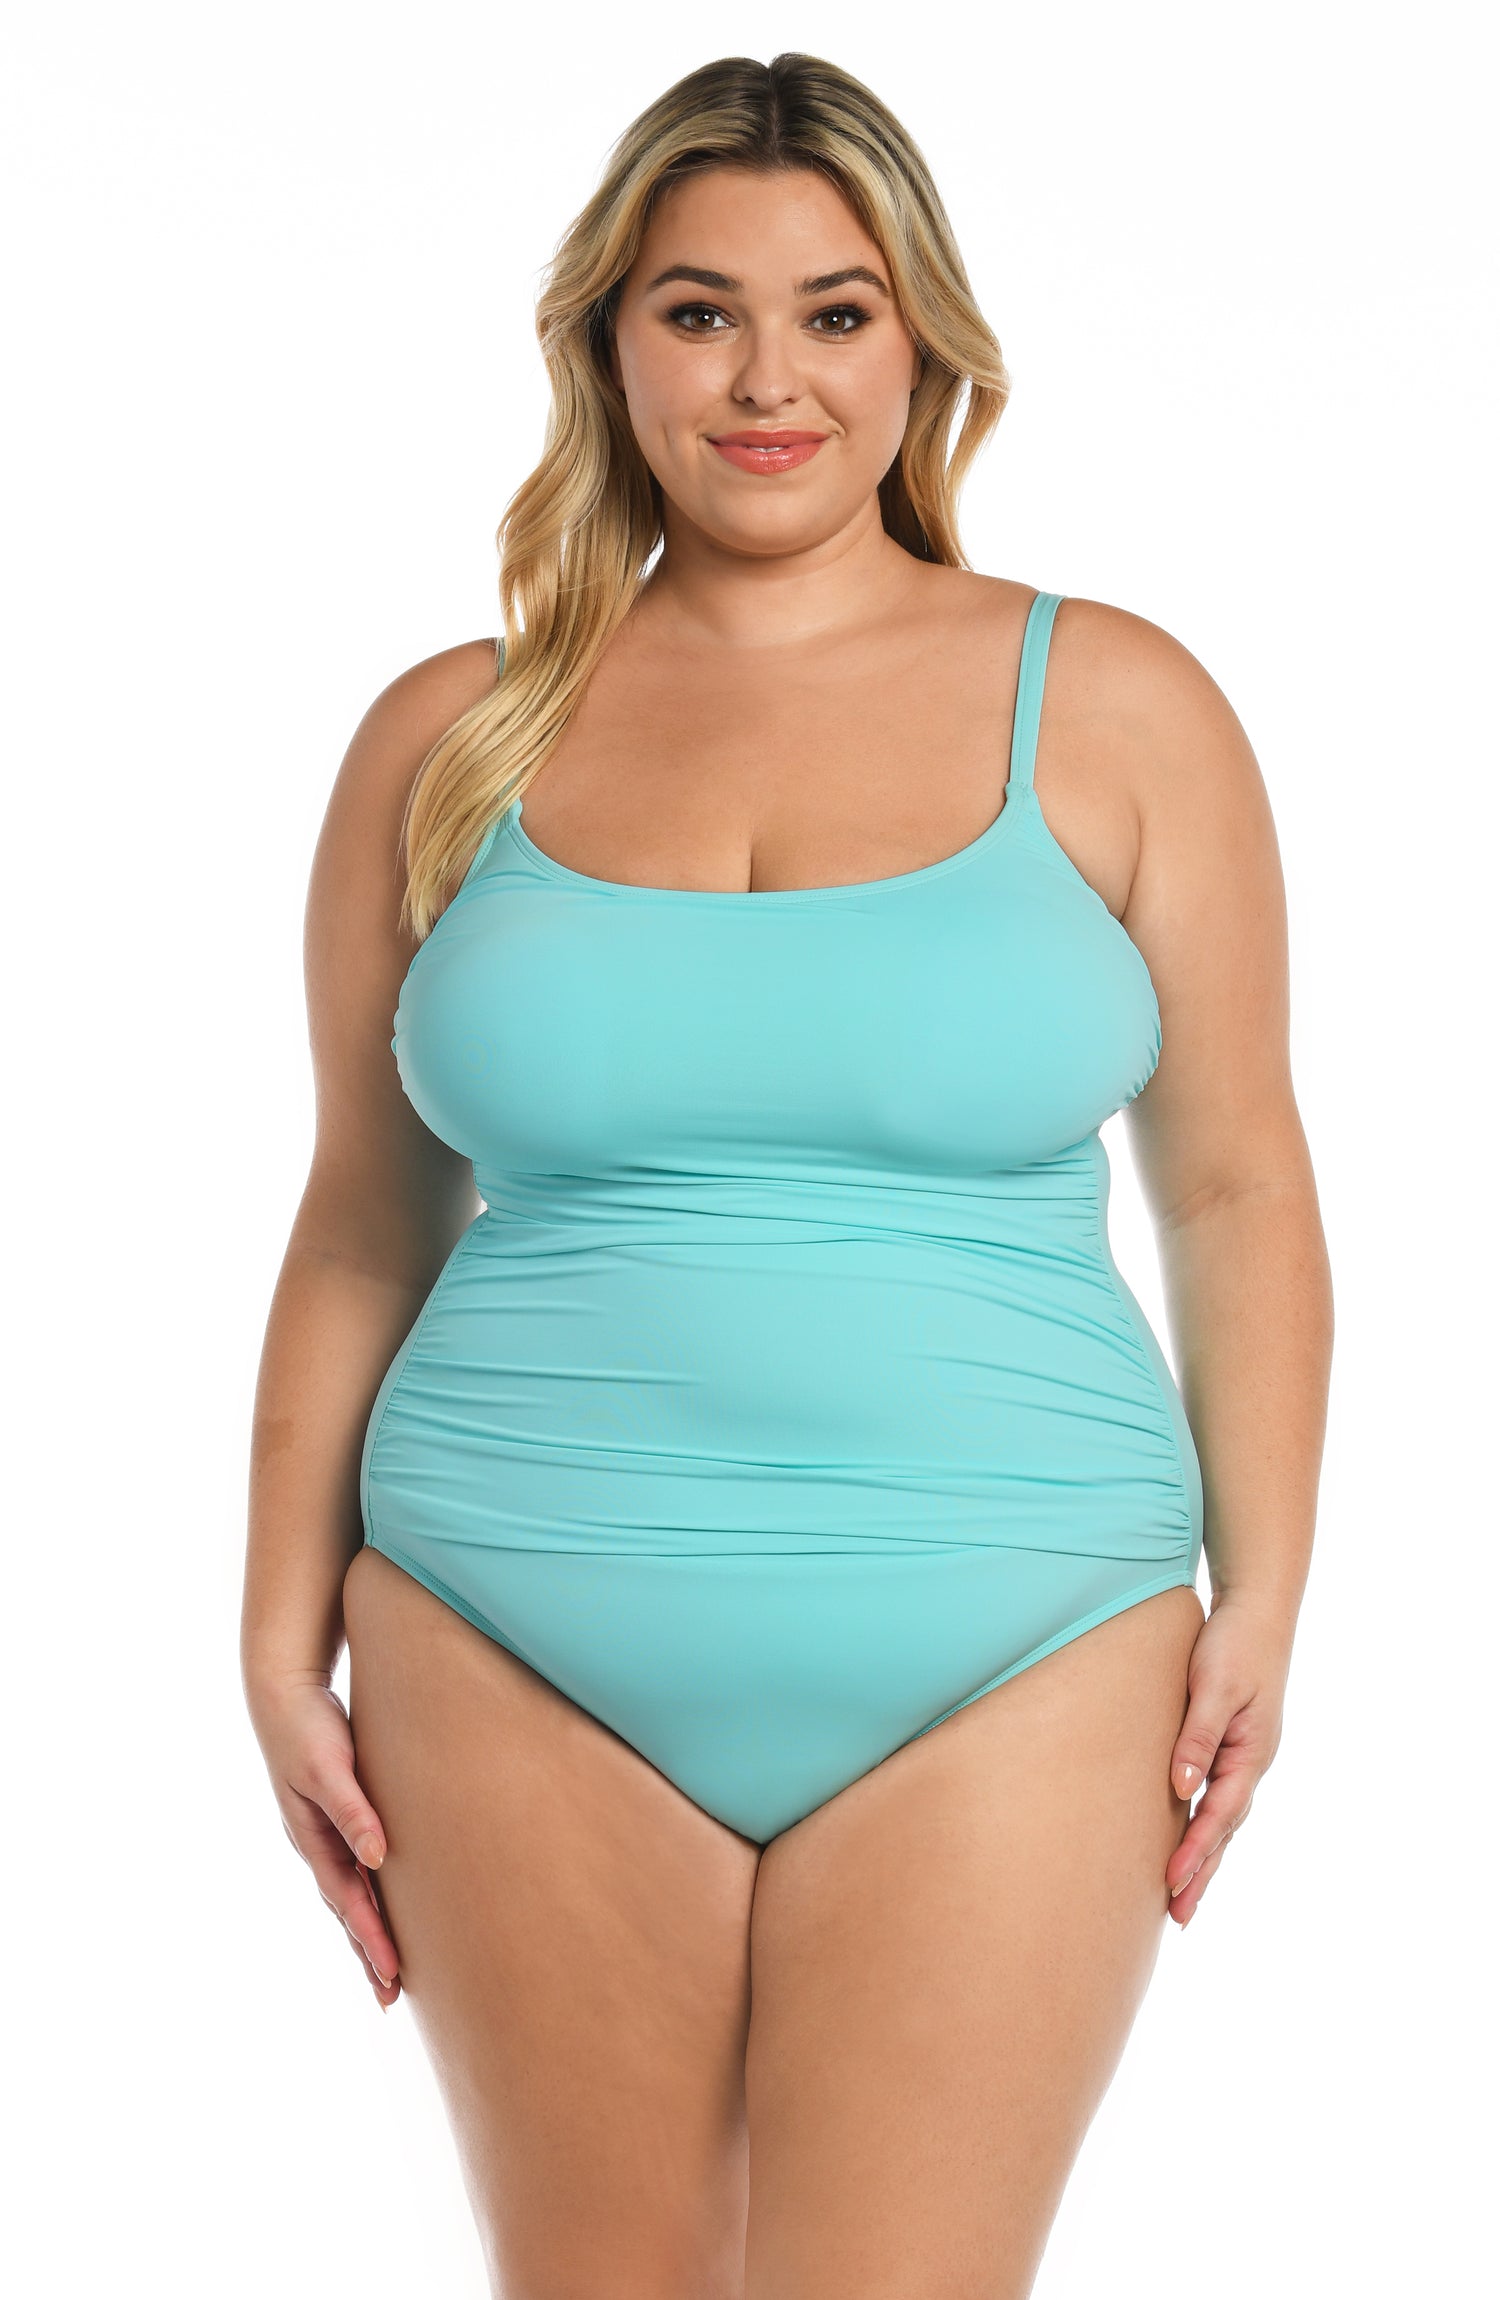 Model is wearing a ice blue colored one piece swimsuit from our Best-Selling Island Goddess collection.